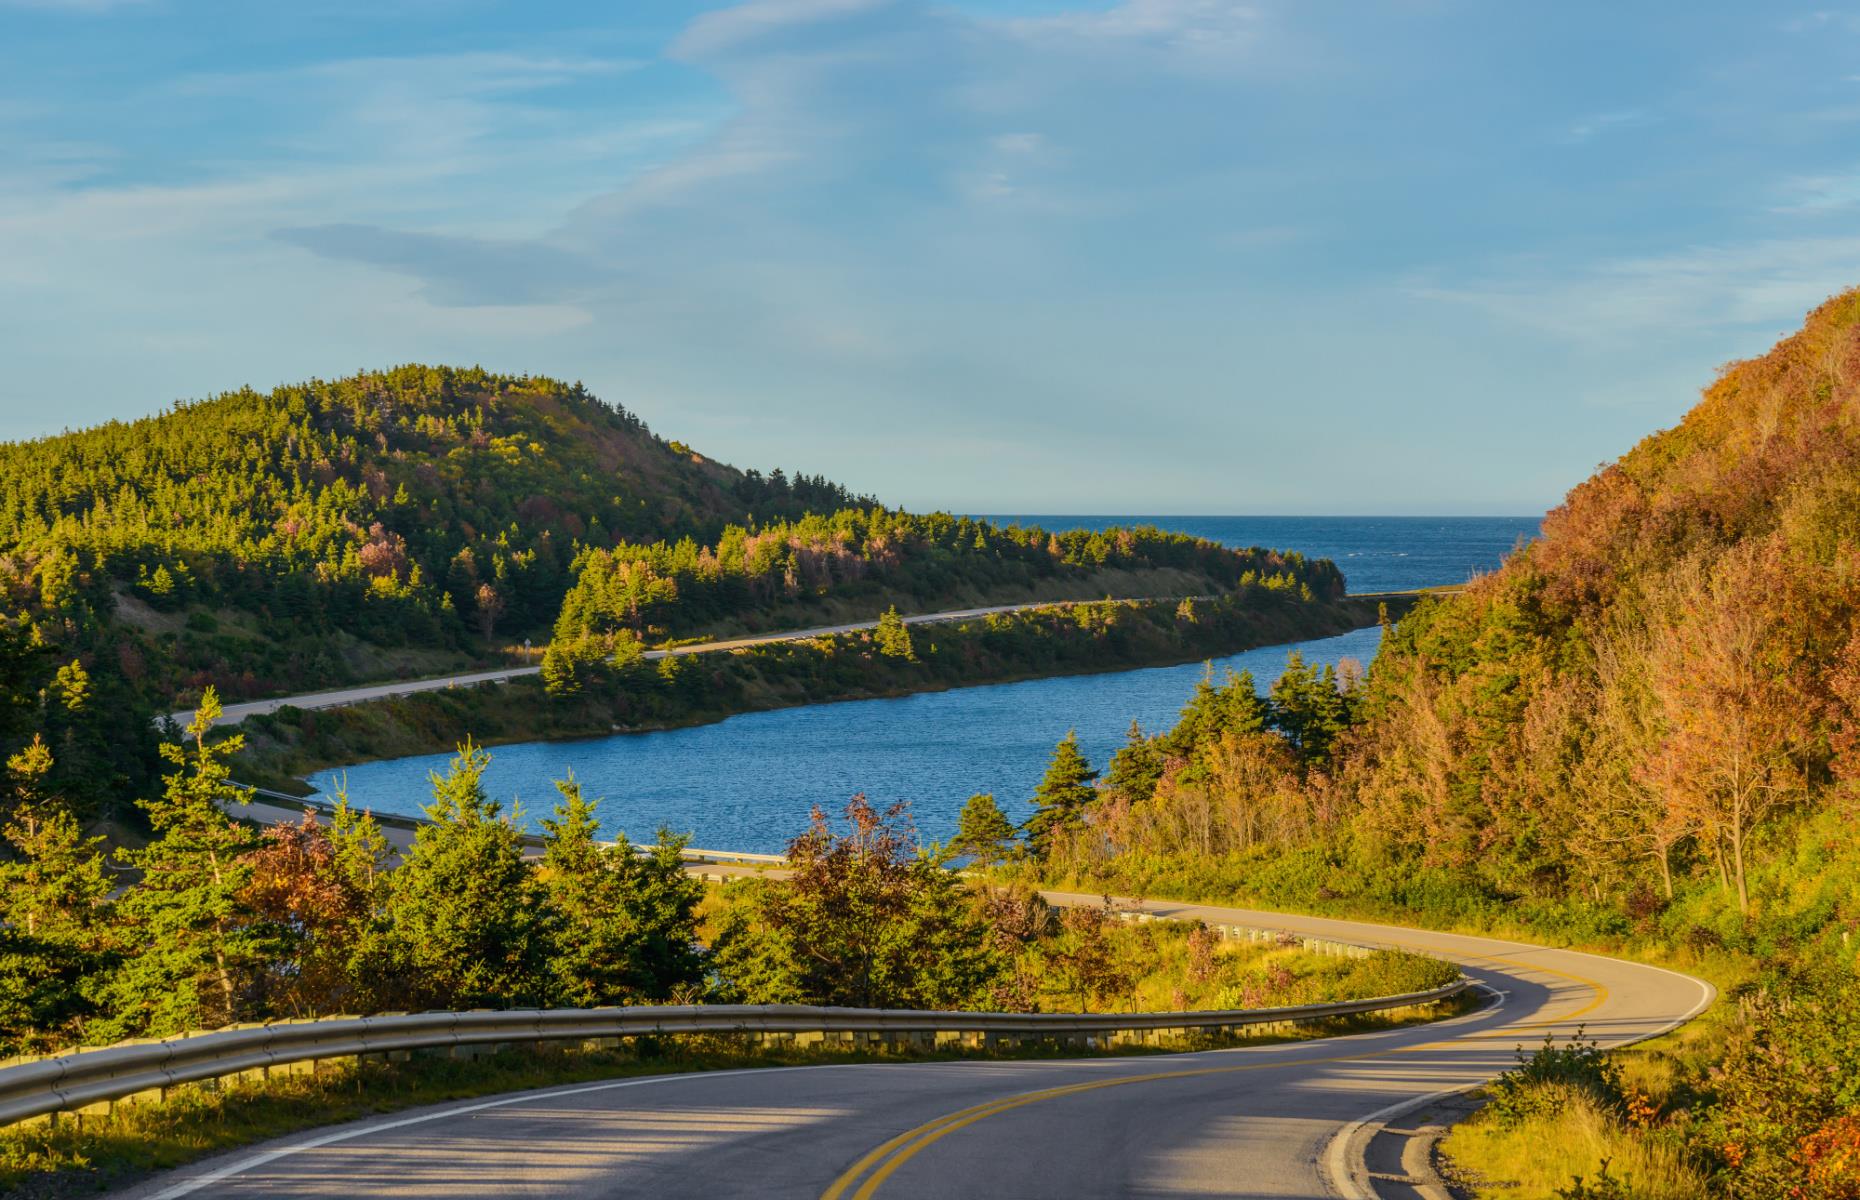 Cape Breton Island, a large island off the north coast of Nova Scotia, has a special place in Canadian culture, largely because of the traditional fiddle music that’s so tied to the island’s way of life. There’s no better way to see the island’s culture and stunning natural beauty than to take a drive along the Cabot Trail, a 185-mile (298km) loop that circles the northwestern part of the island.